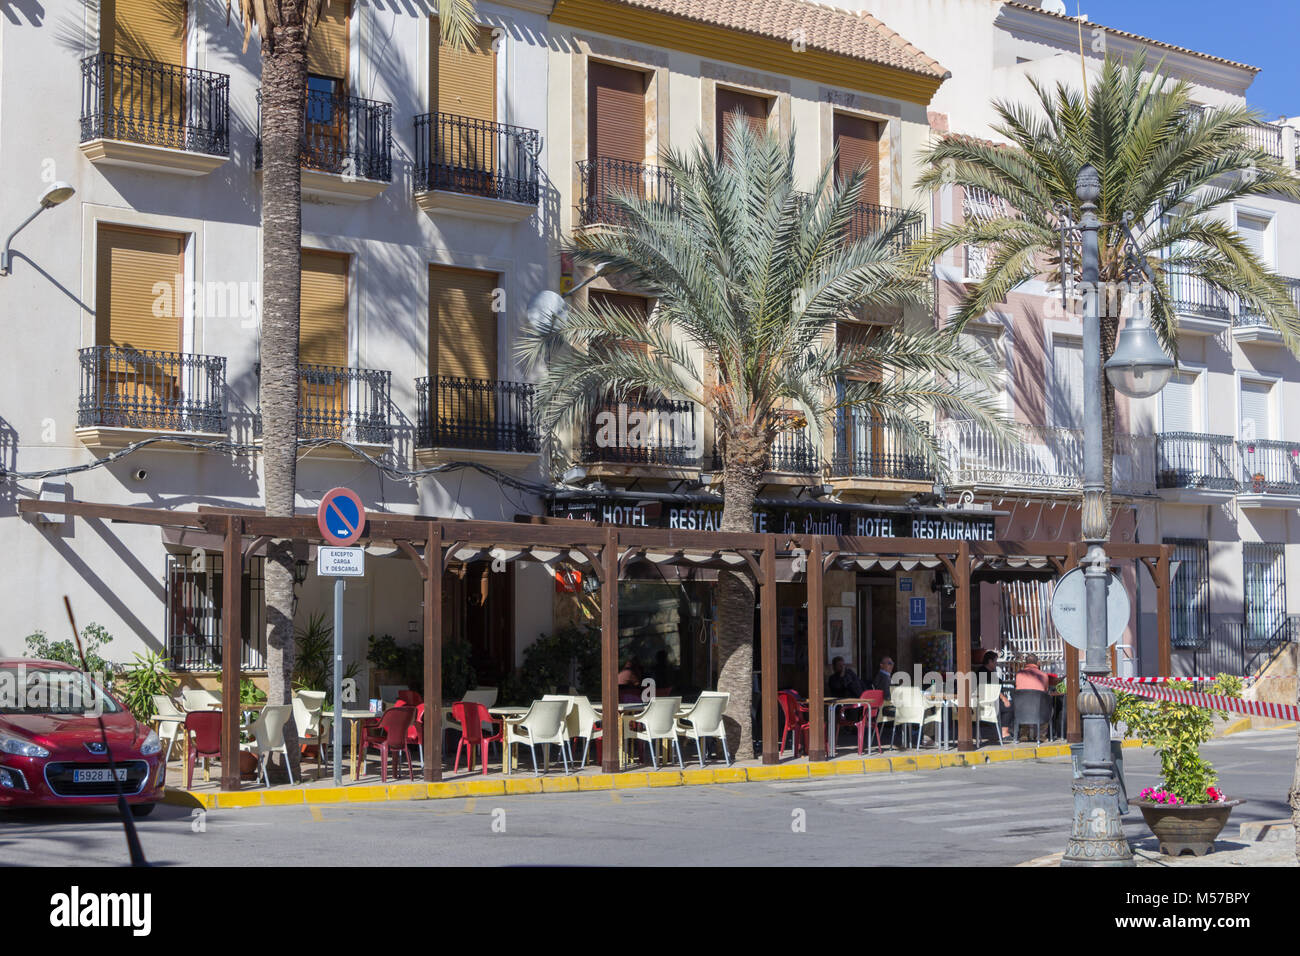 Hotel and Restaurant in Albox a Small Rural Town in Almeria province, Andalucía, Spain Stock Photo